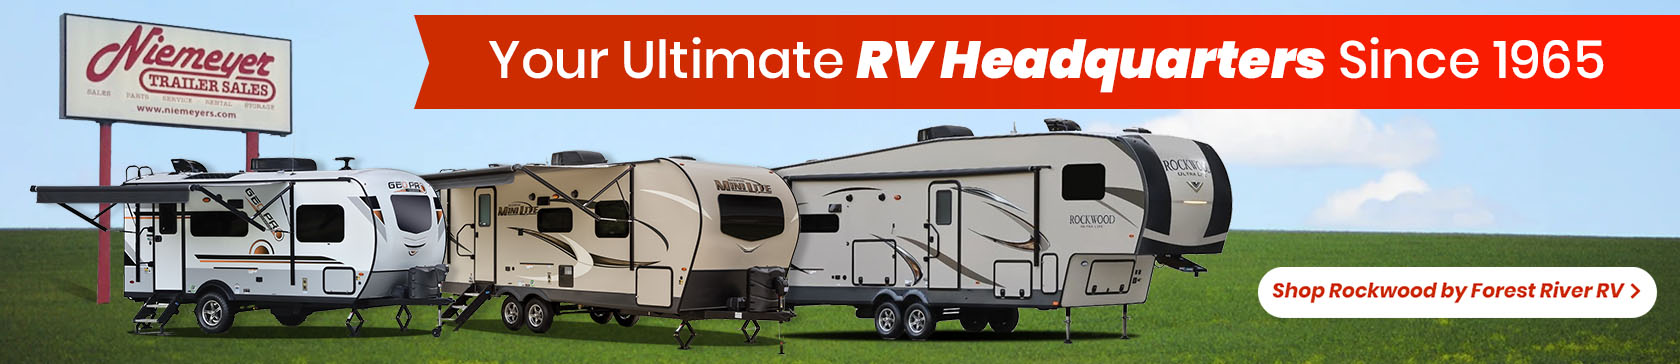 Your Ultimate RV Headquarters Since 1965